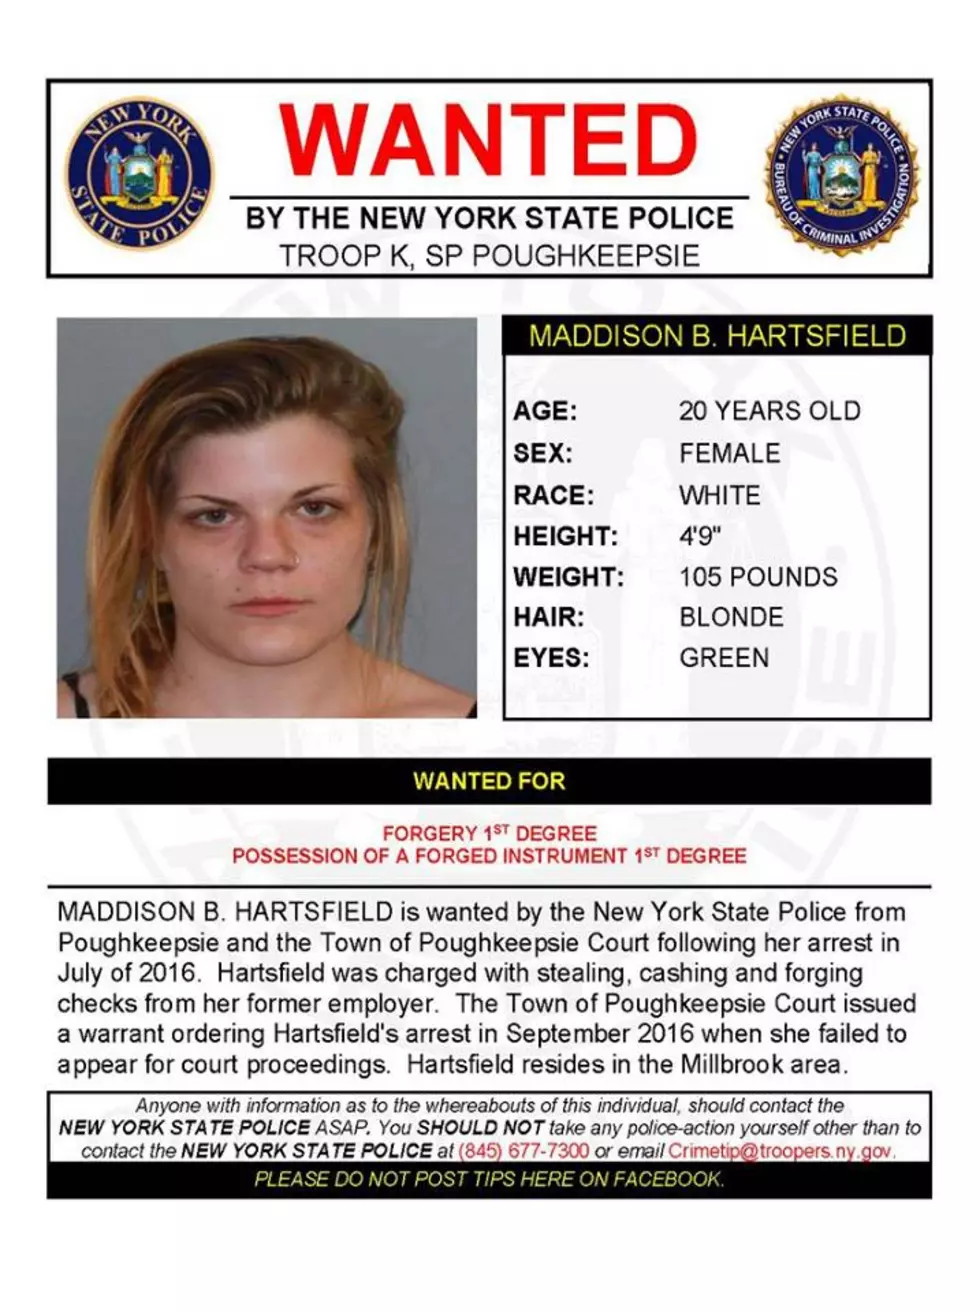 Warrant Wednesday: Dutchess County Woman Wanted for Forgery